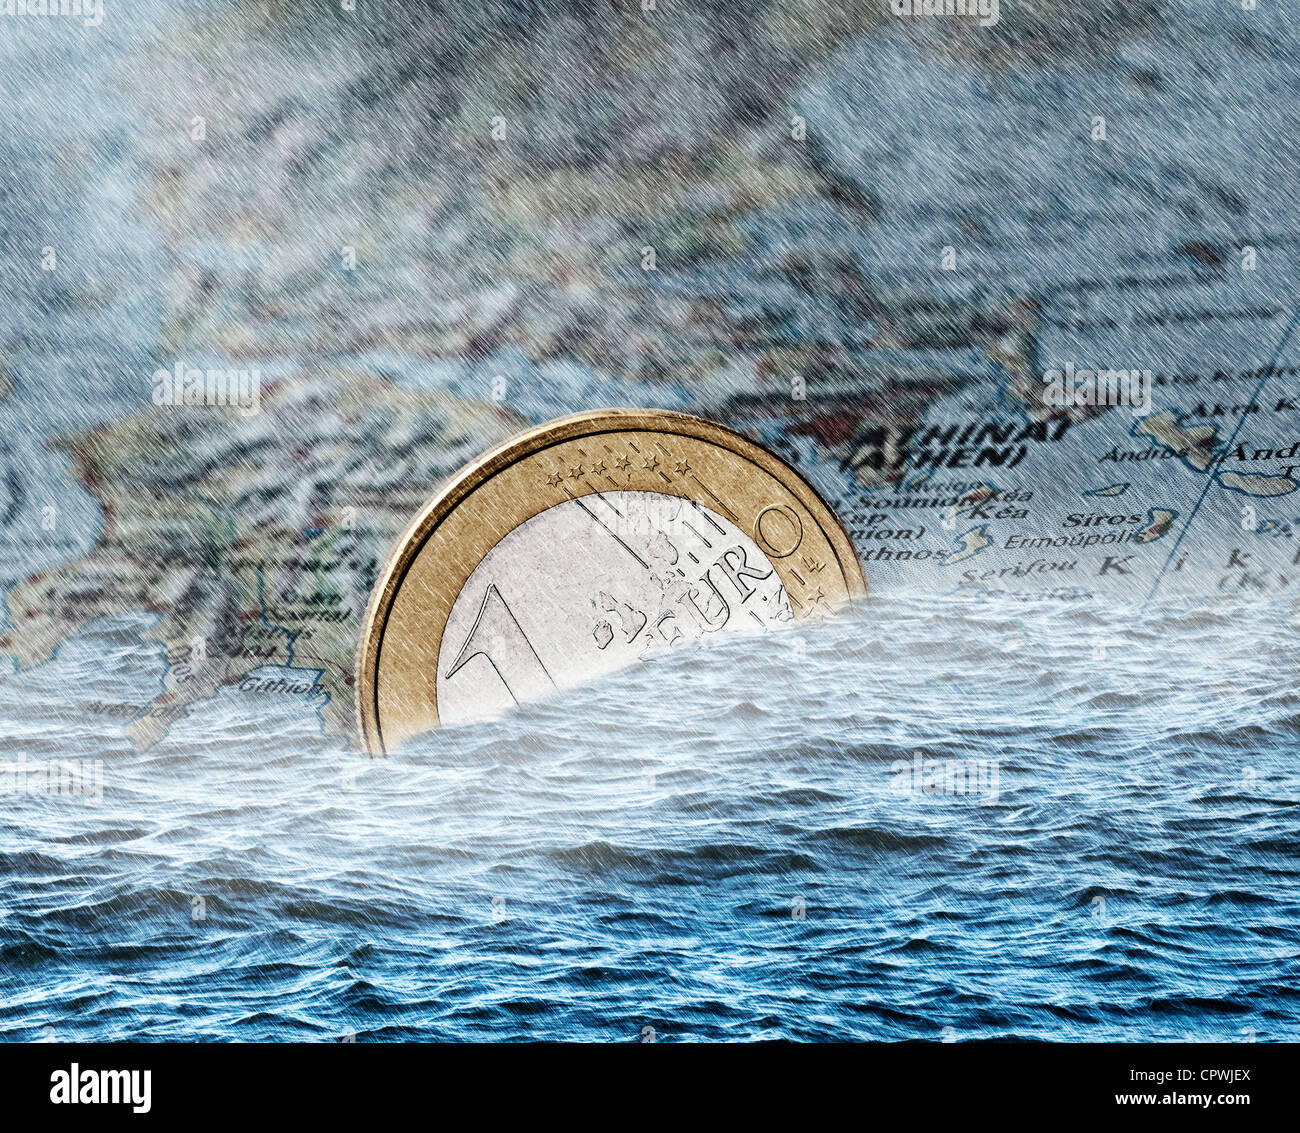 €-coin sinks into the sea off the coast of Greece. Stock Photo